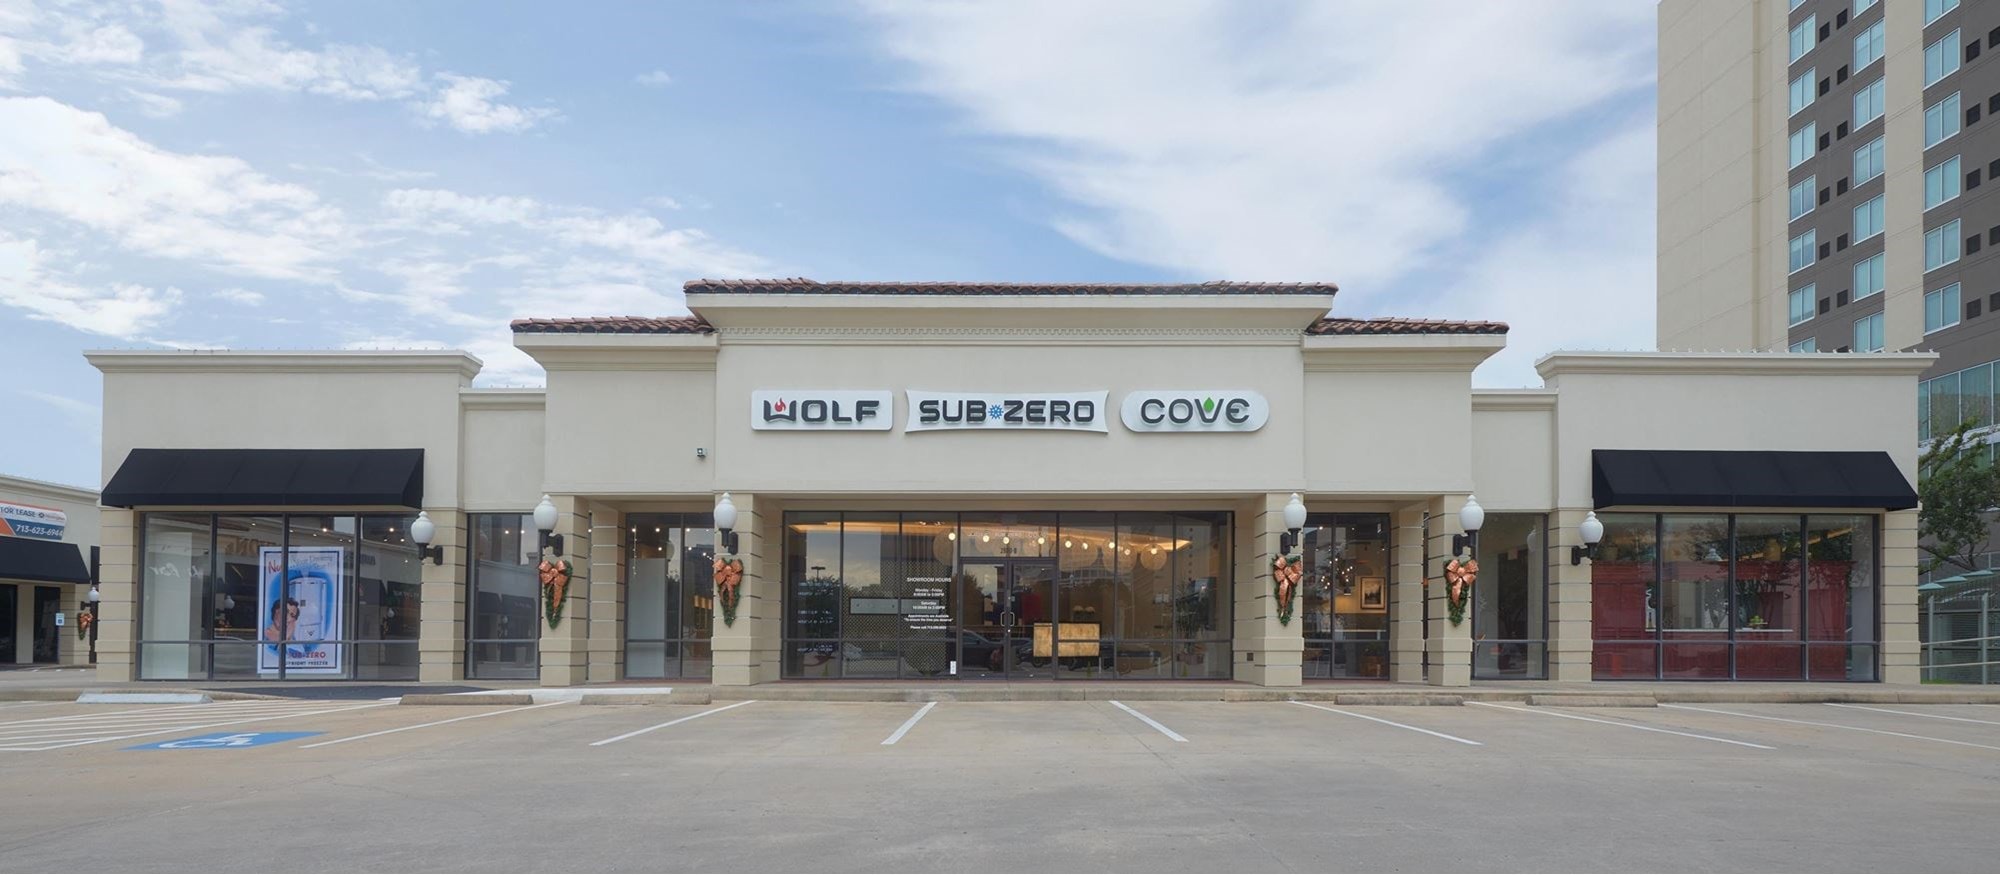 Experience the instantaneous response of cooktops and refrigerators at the Sub-Zero, Wolf and Cove Showroom in Houston, Texas